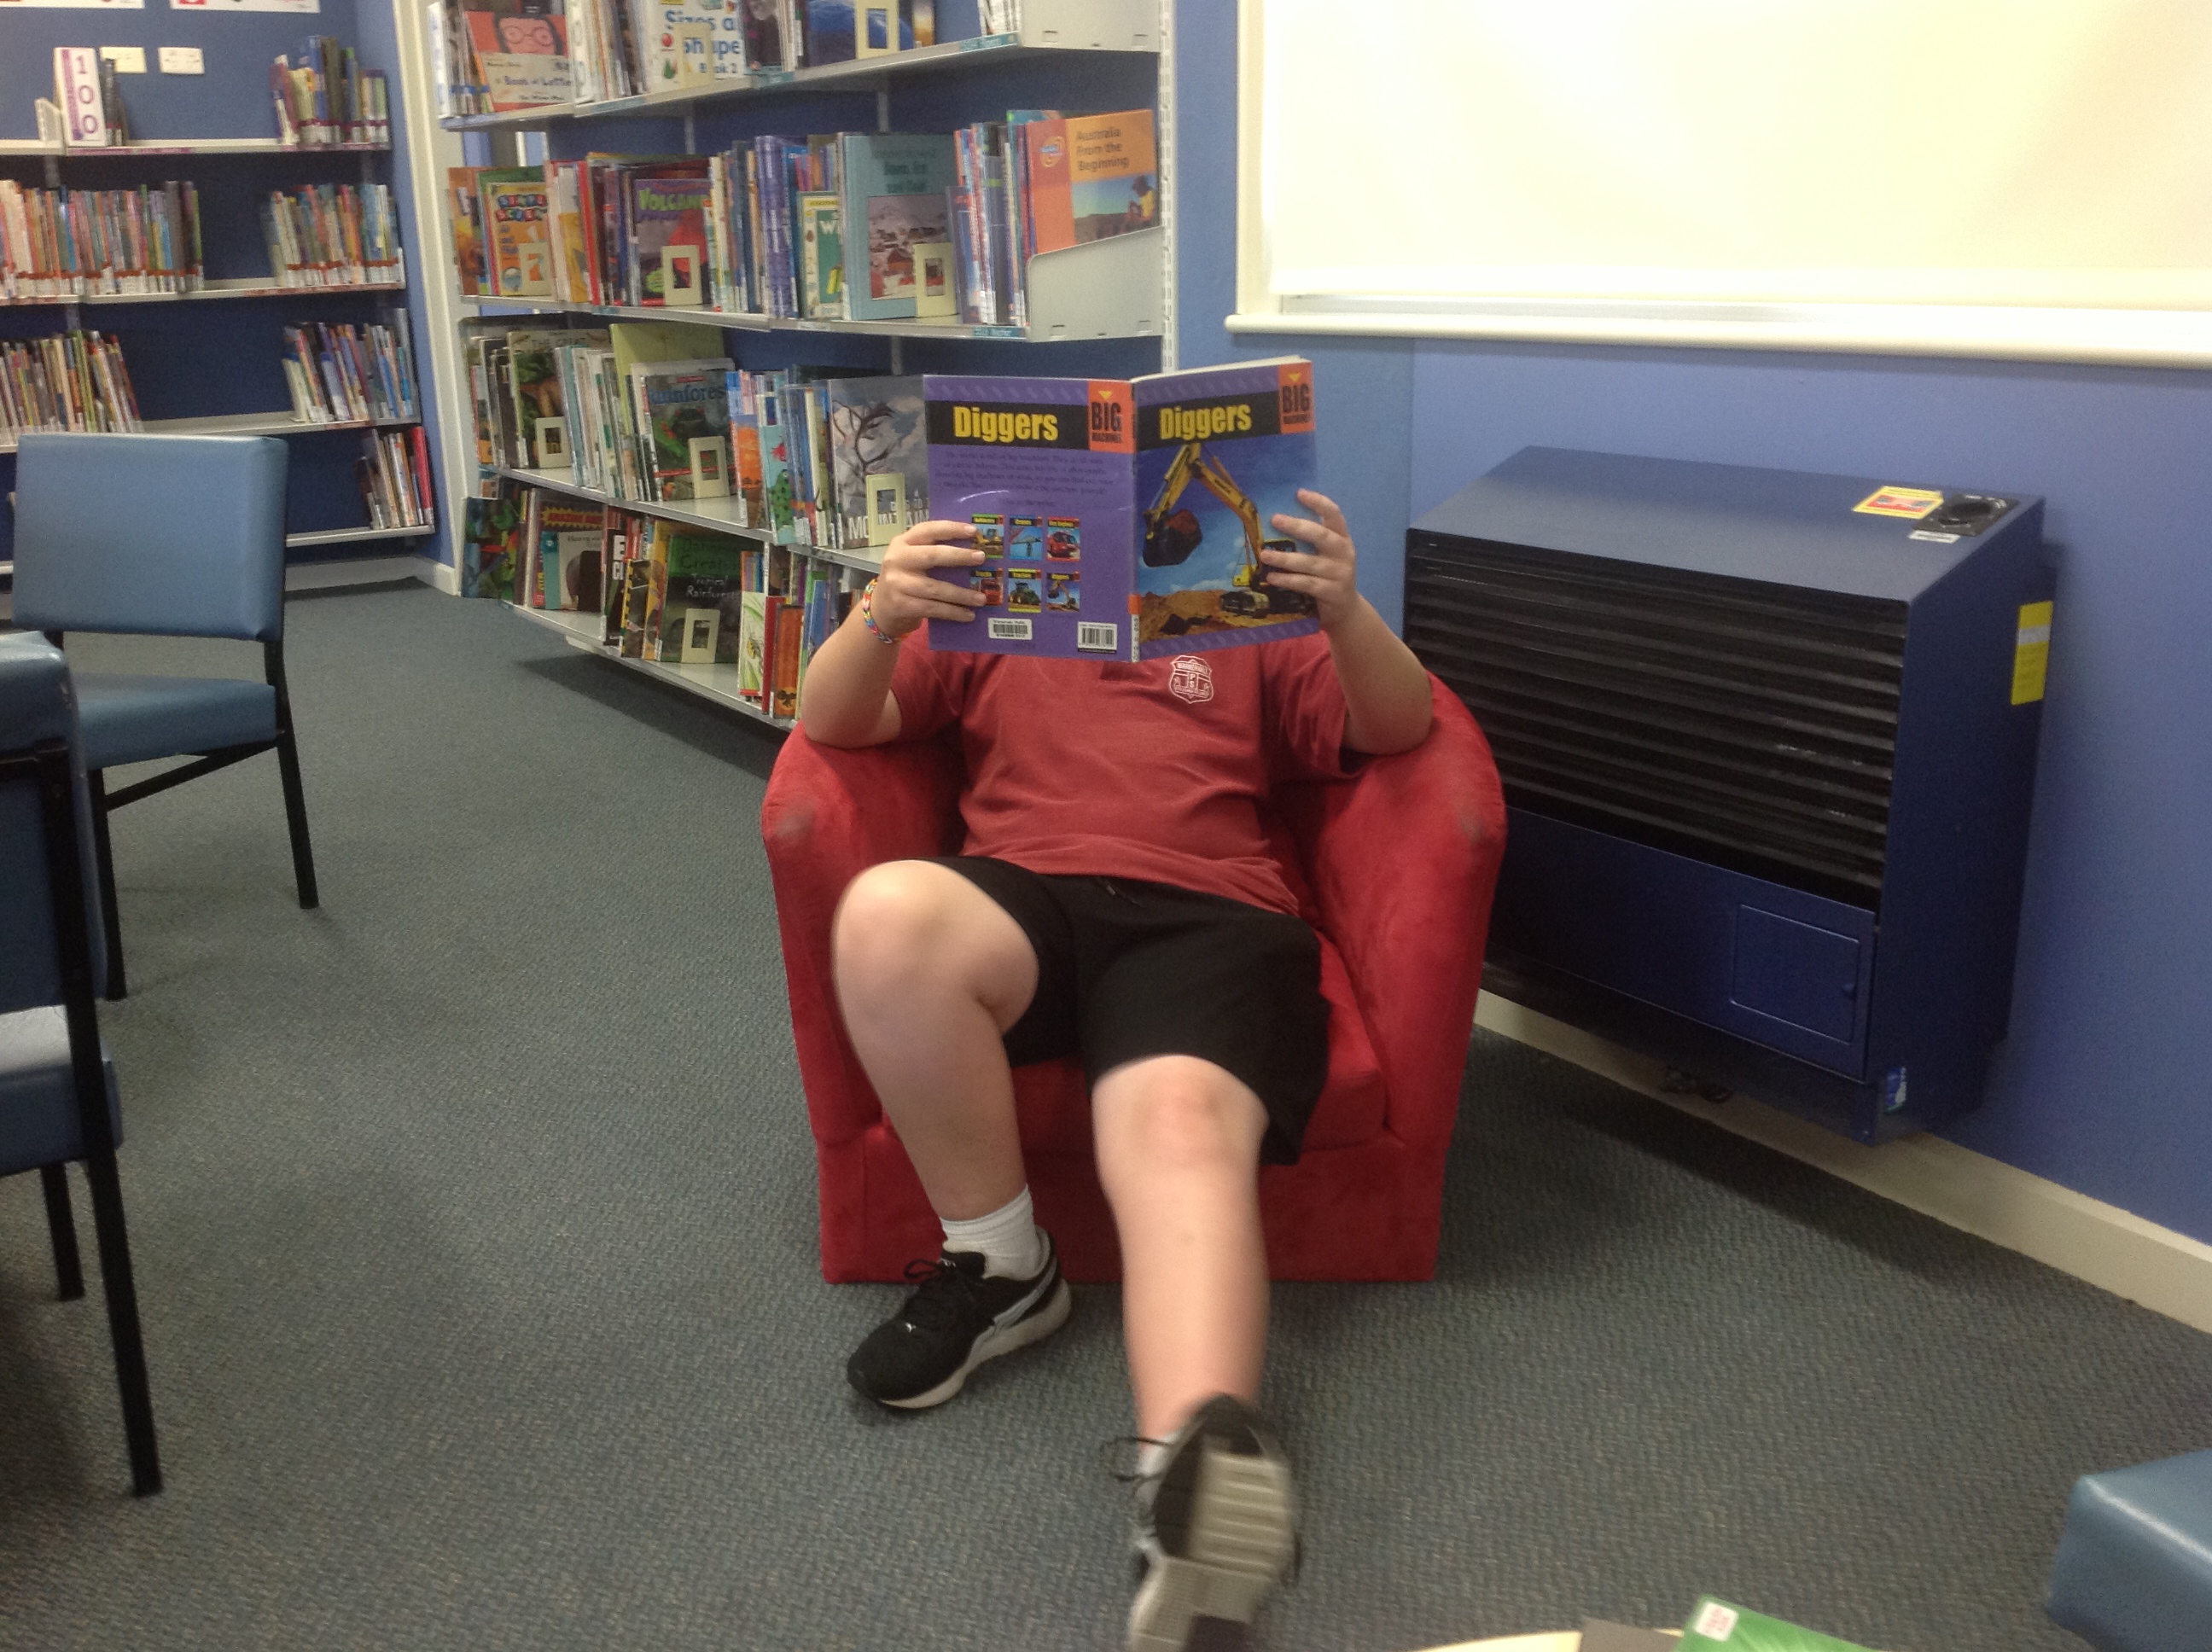 Student reading book in library.